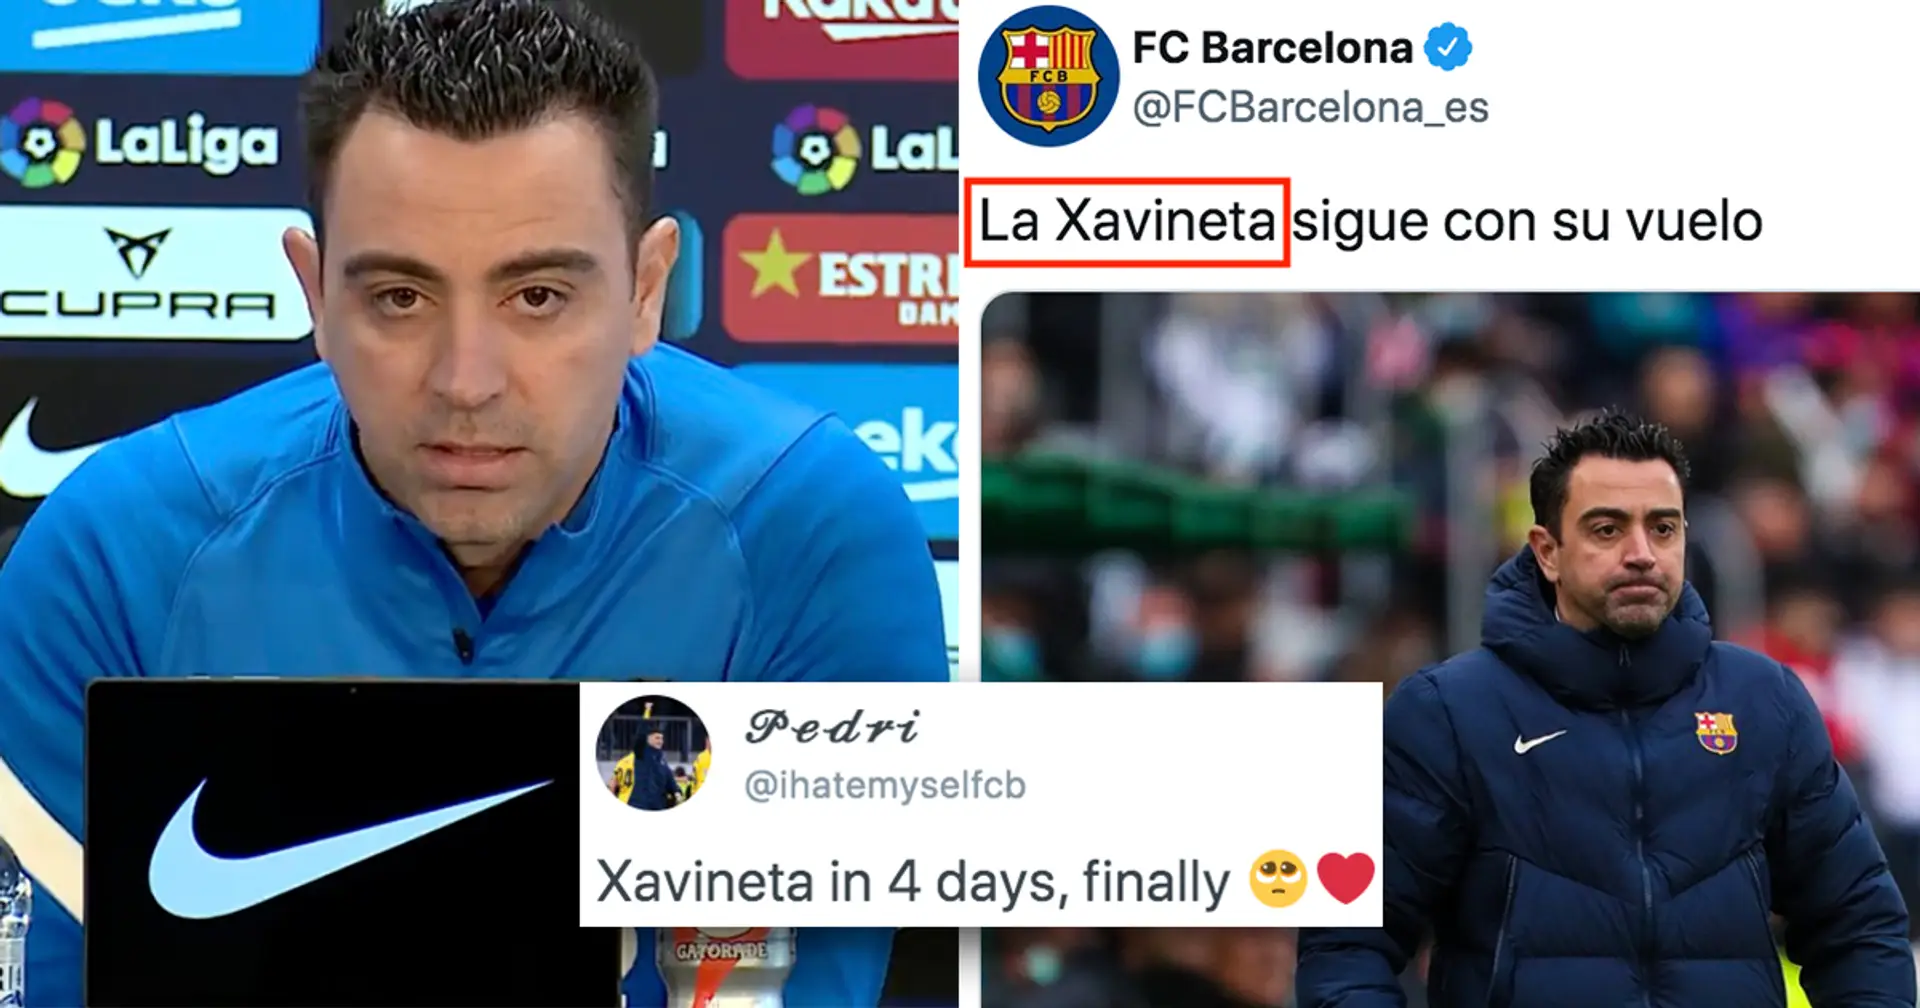 What exactly is 'Xavineta' and what does Xavi say about it? Answered